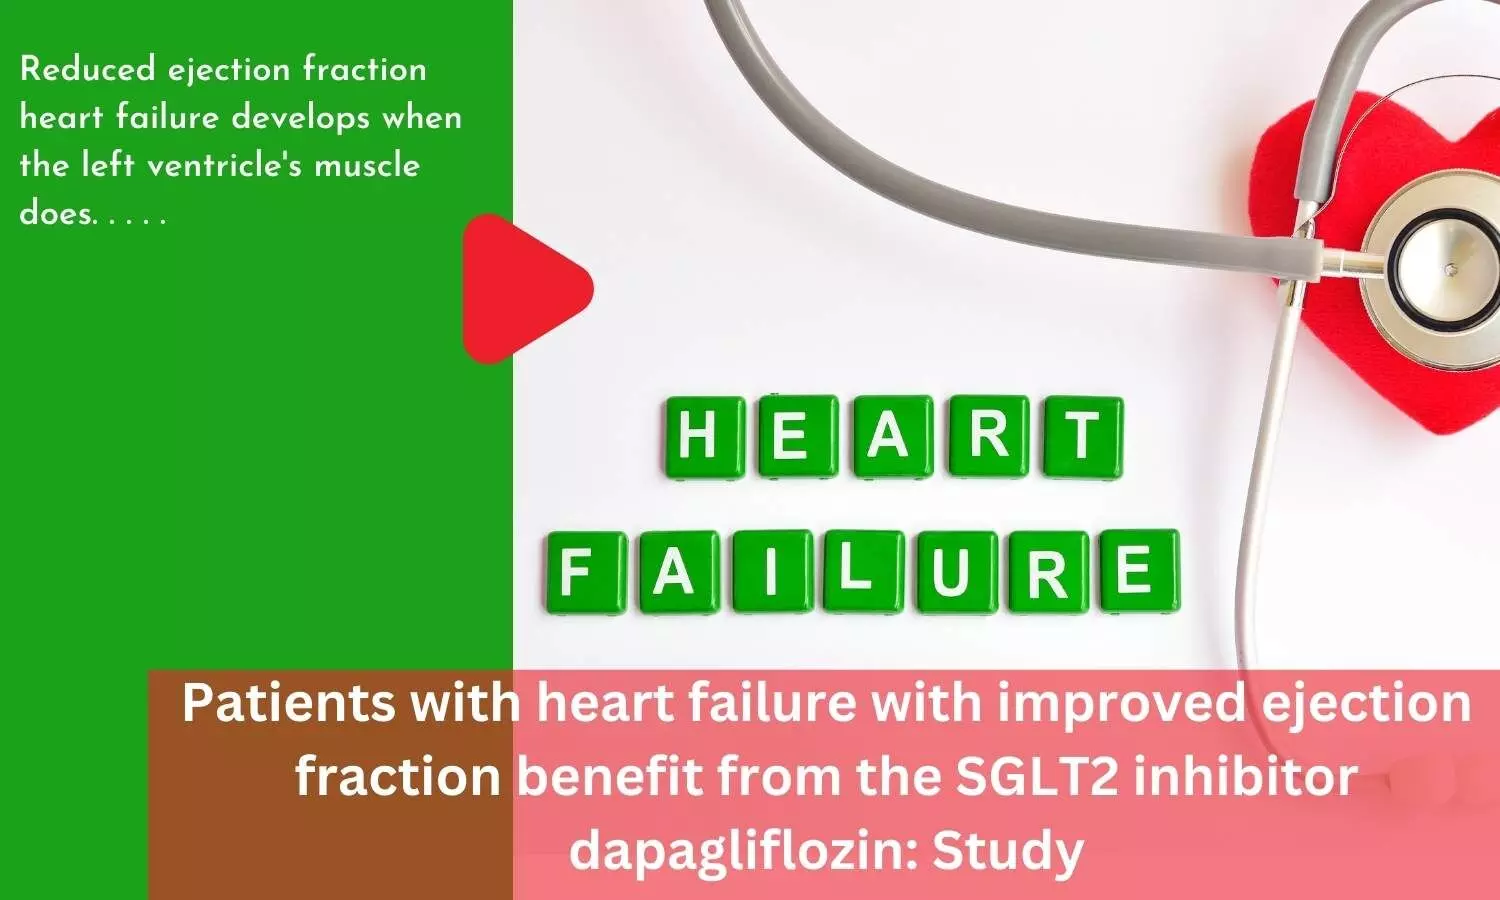 Patients with heart failure with improved ejection fraction benefit from the SGLT2 inhibitor dapagliflozin: Study